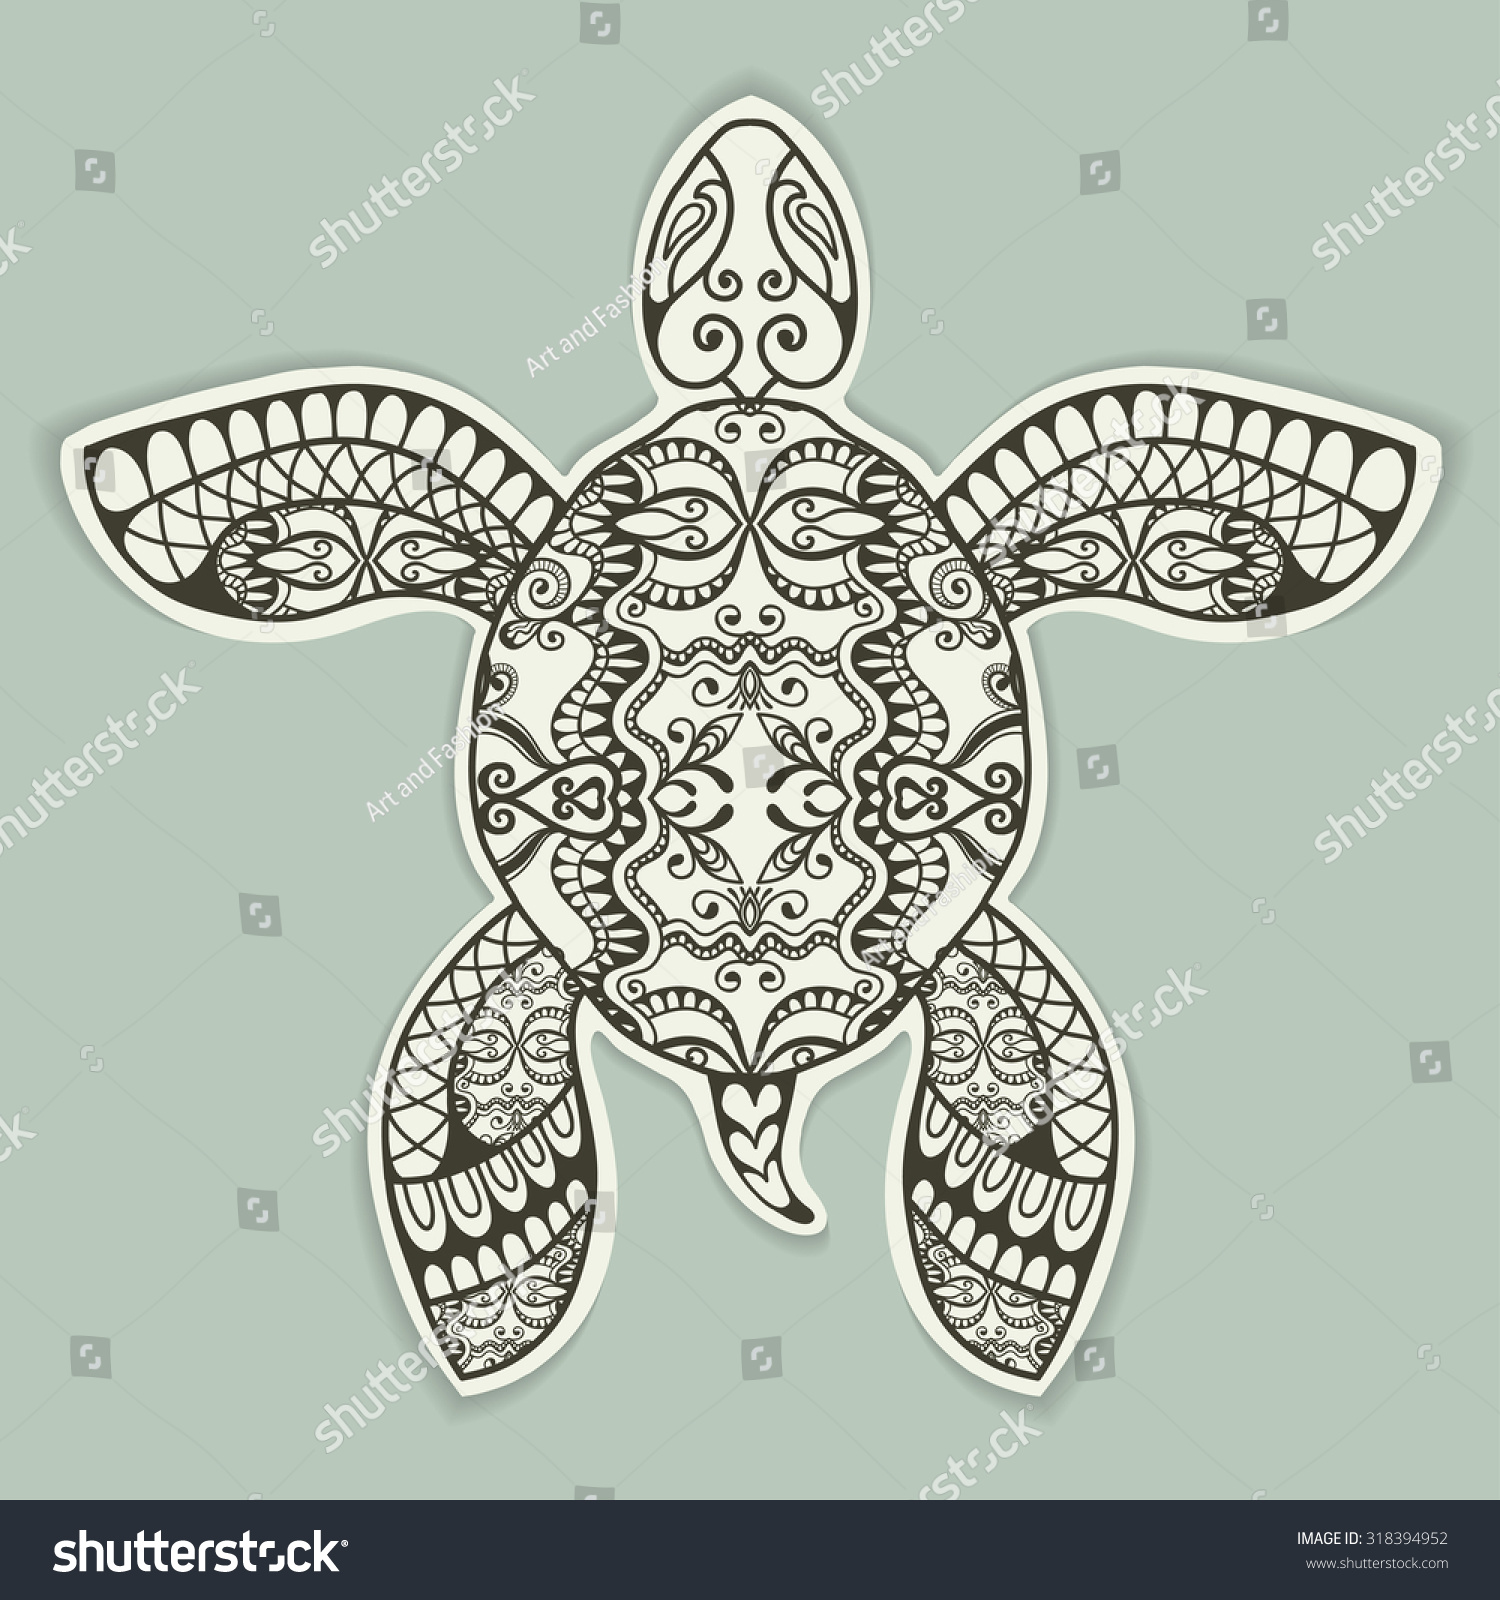 SVG of Decorative turtle with ethnic ornament in cut out style with shadow, vector tribal totem animal, isolated element for scrapbook, invitation or greeting card design  svg